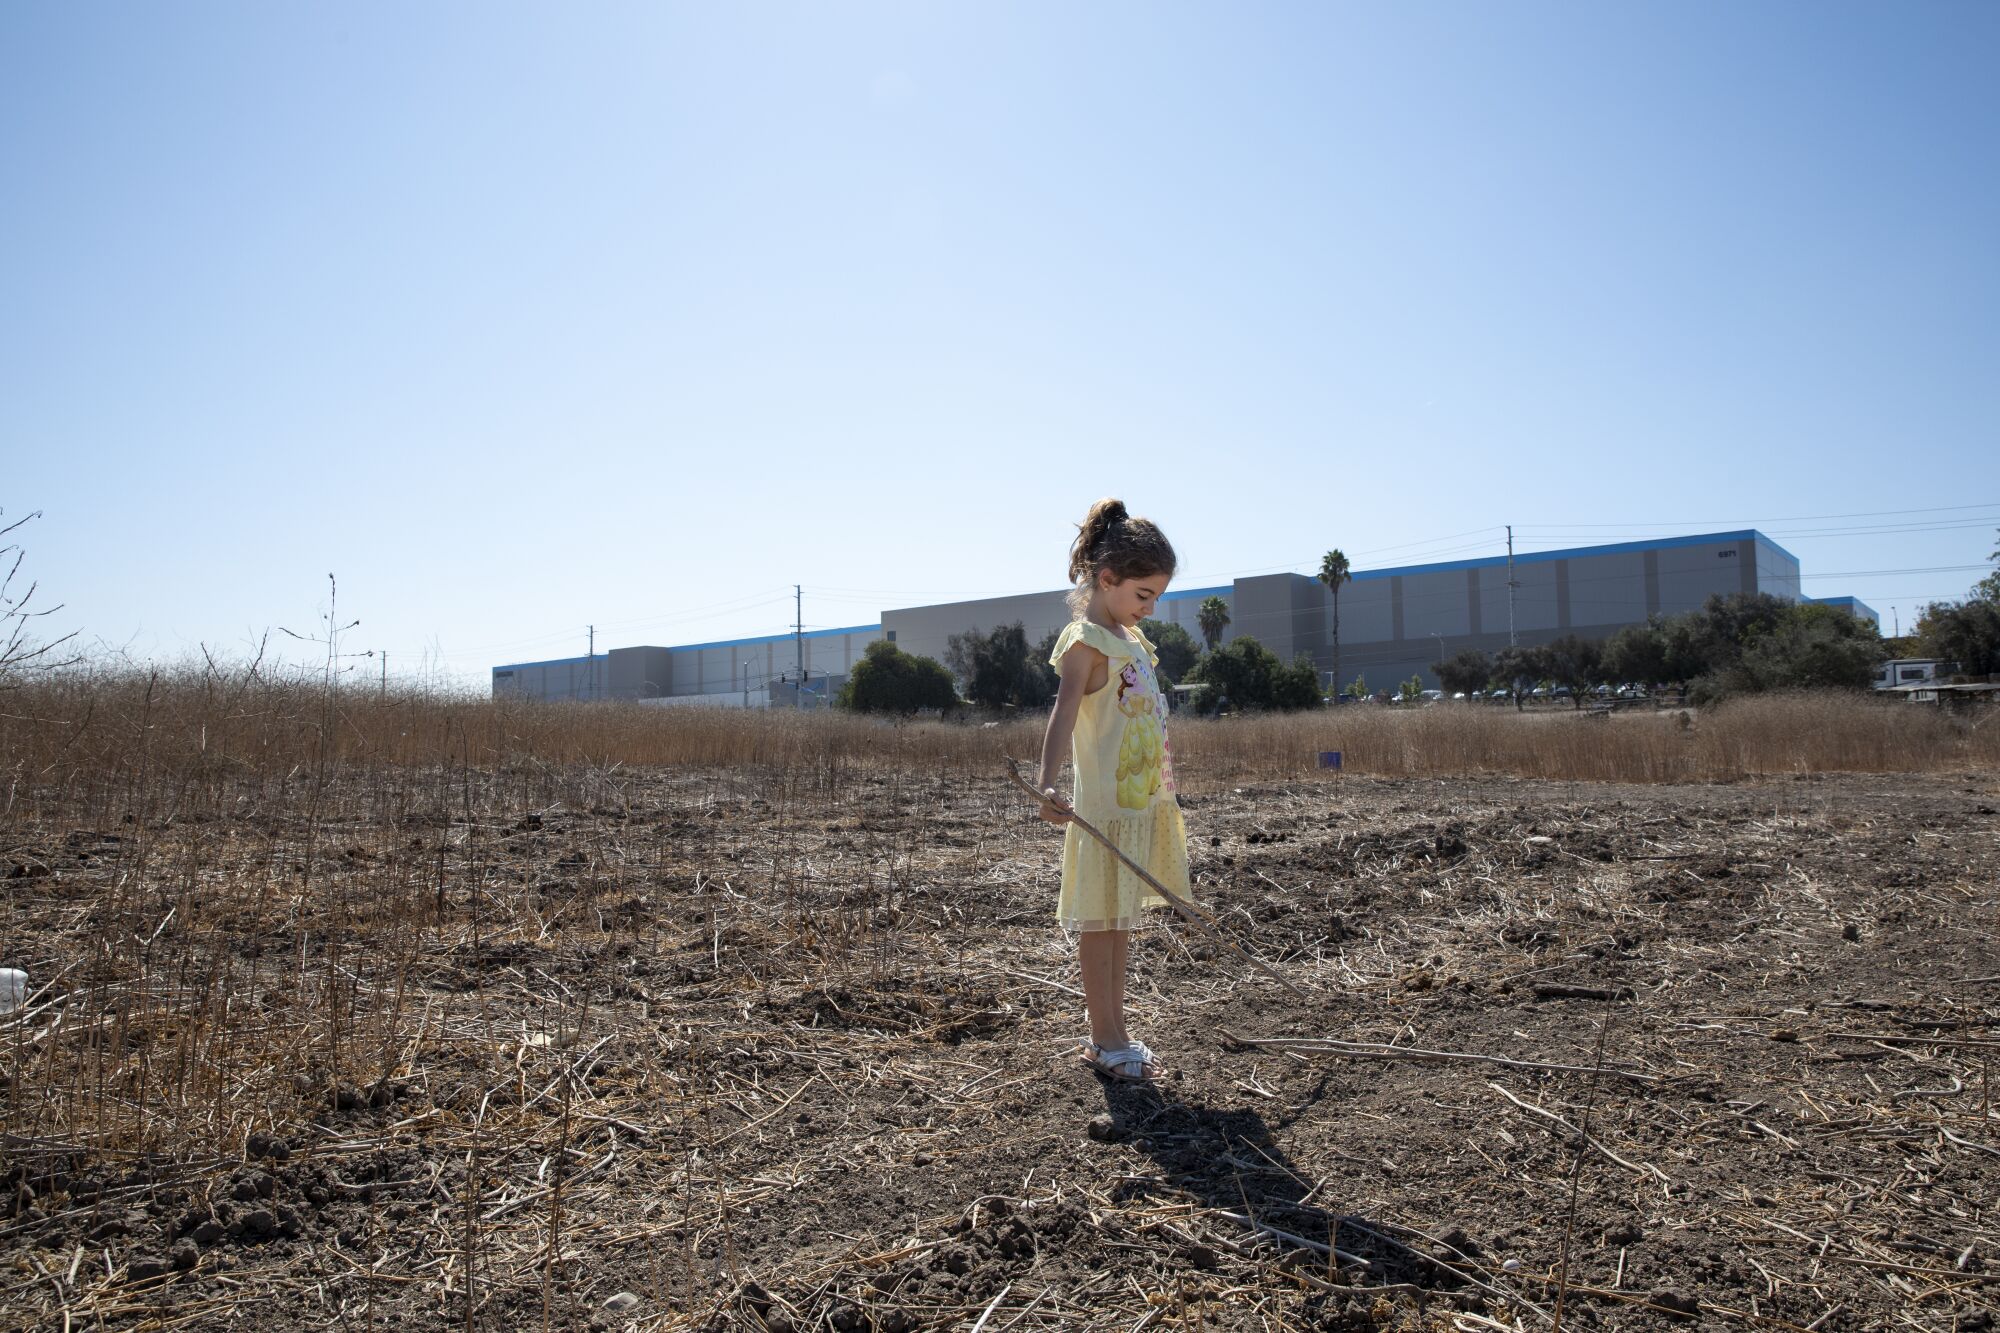 Alina Jimenez Gutierrez, 7, plays with a stick in a pasture that faces a newly constructed